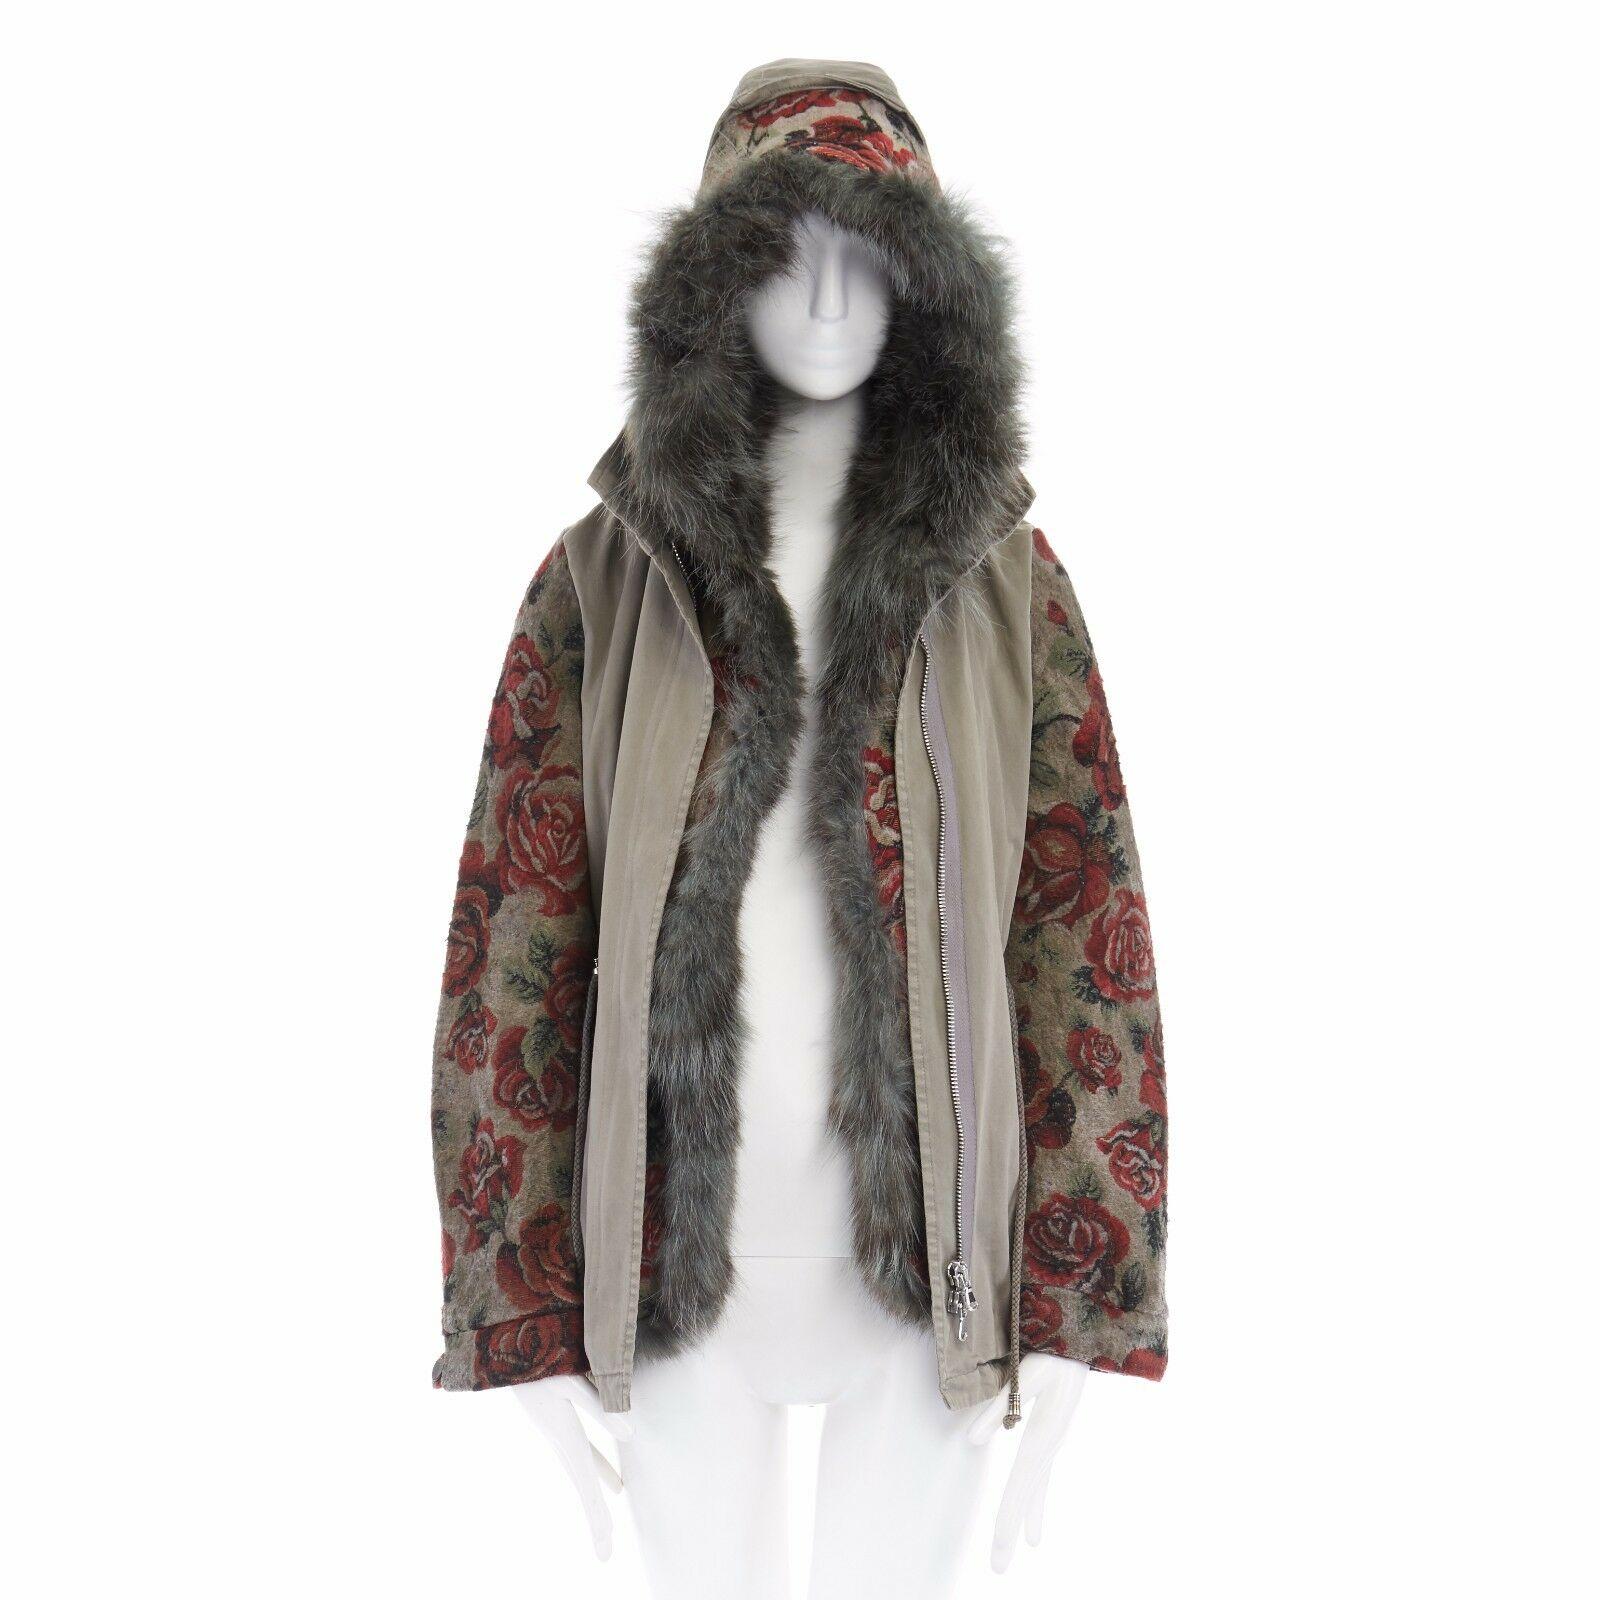 PROJECT FOCE SINGLESEASON khaki fur hood rose jacquard military parka IT40 US2 S 
Reference: WEYN/A00029 
Brand: Project Foce 
Material: Cotton 
Color: Green 
Pattern: Floral 
Closure: Zip 
Extra Detail: SINGLE SEASON parka. Washed khaki green